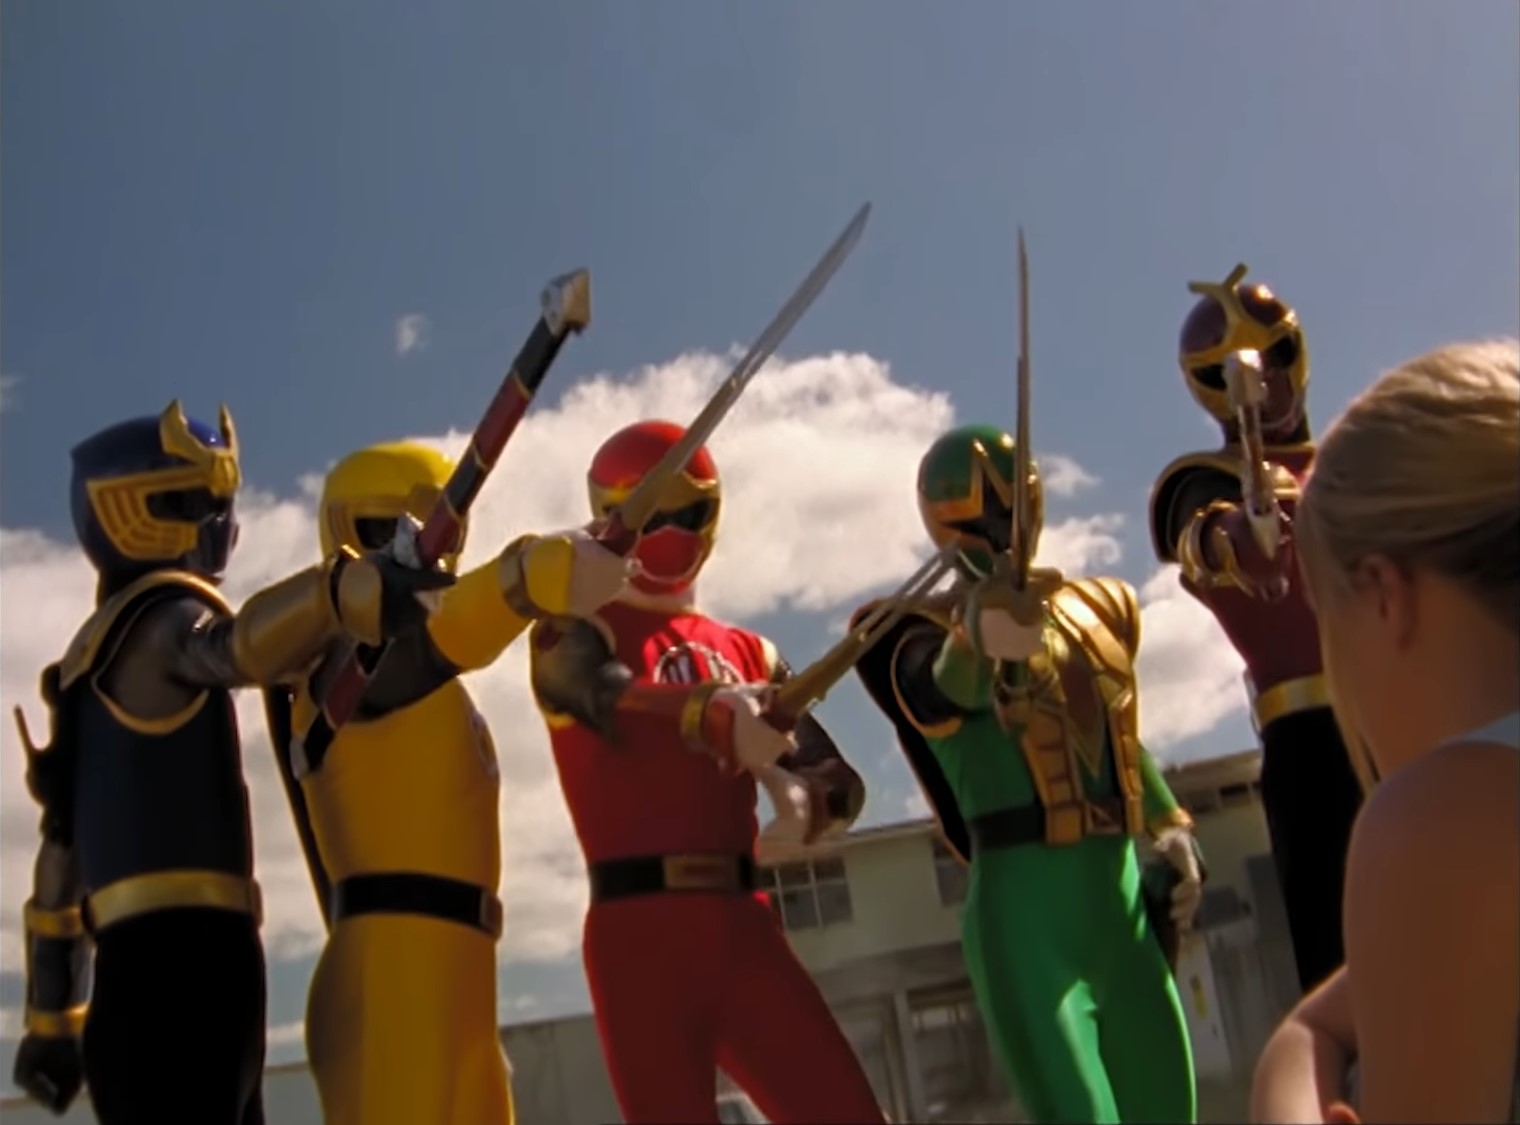 https://static.wikia.nocookie.net/powerrangers/images/b/bf/NS-30.jpg/revision/latest?cb=20221208155658